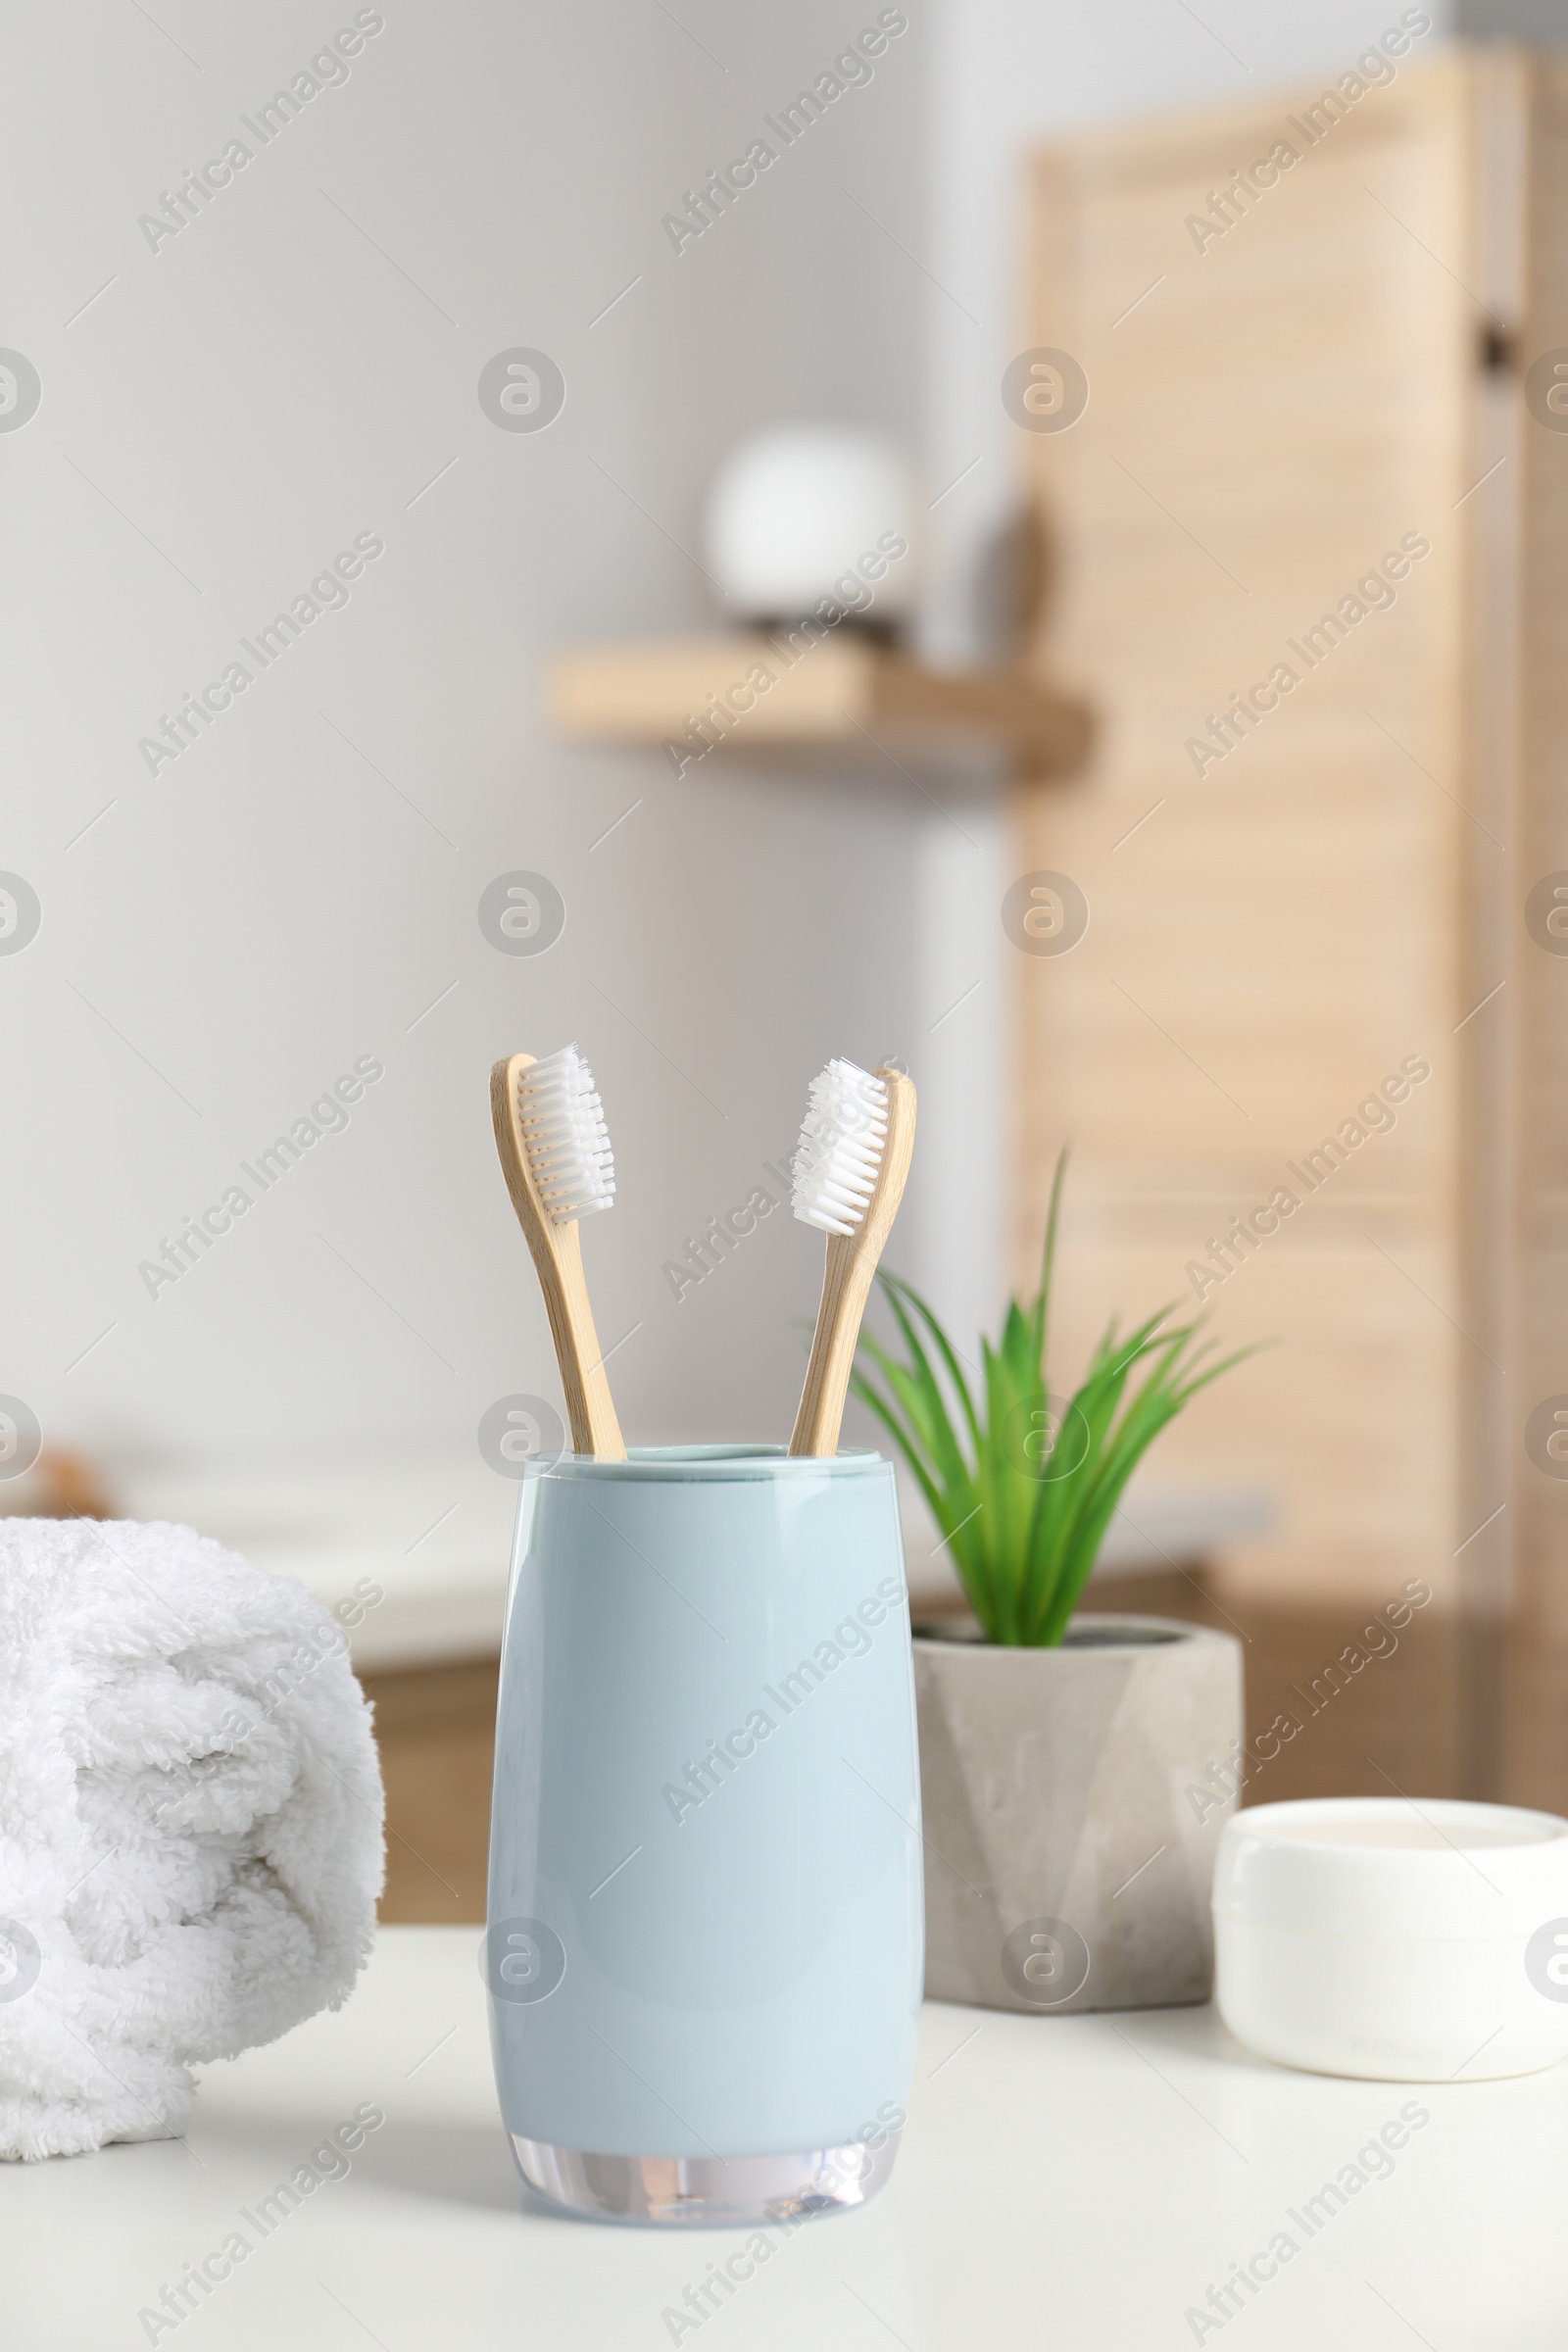 Photo of Bamboo toothbrushes, towel, potted plant and cosmetic product on white countertop in bathroom